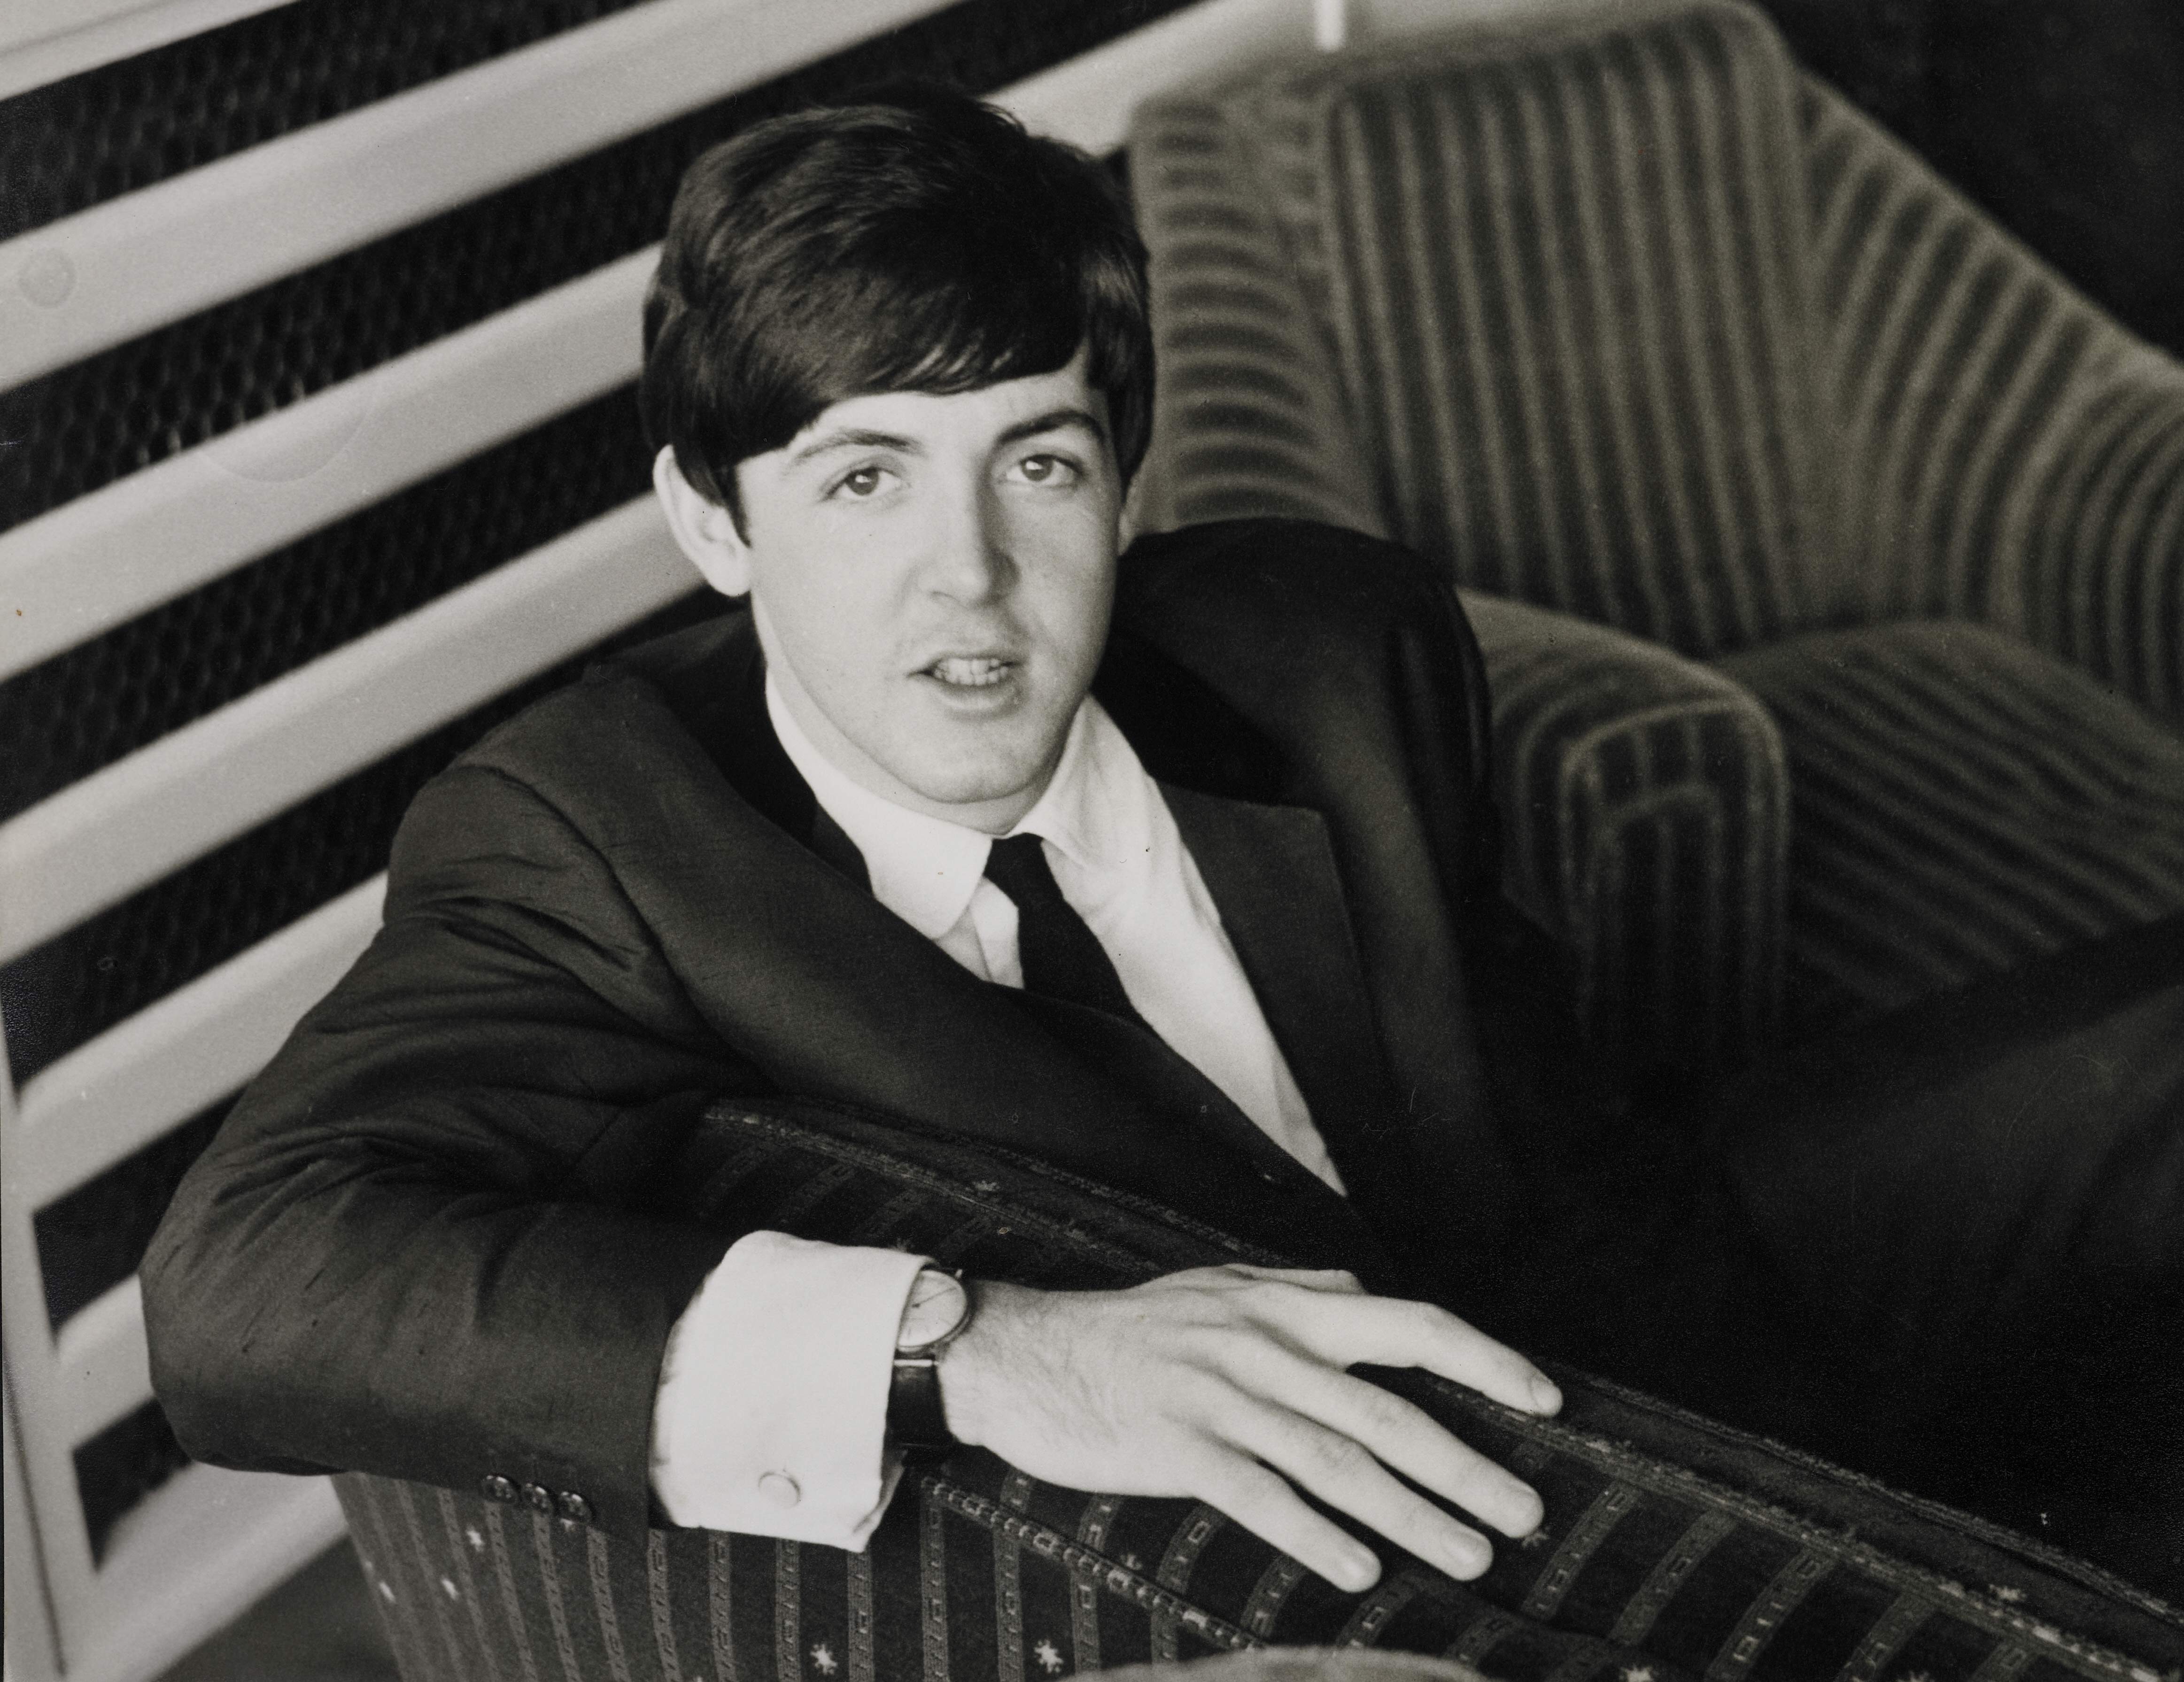 Paul McCartney in black-and-white during The Beatles' "Michelle" era